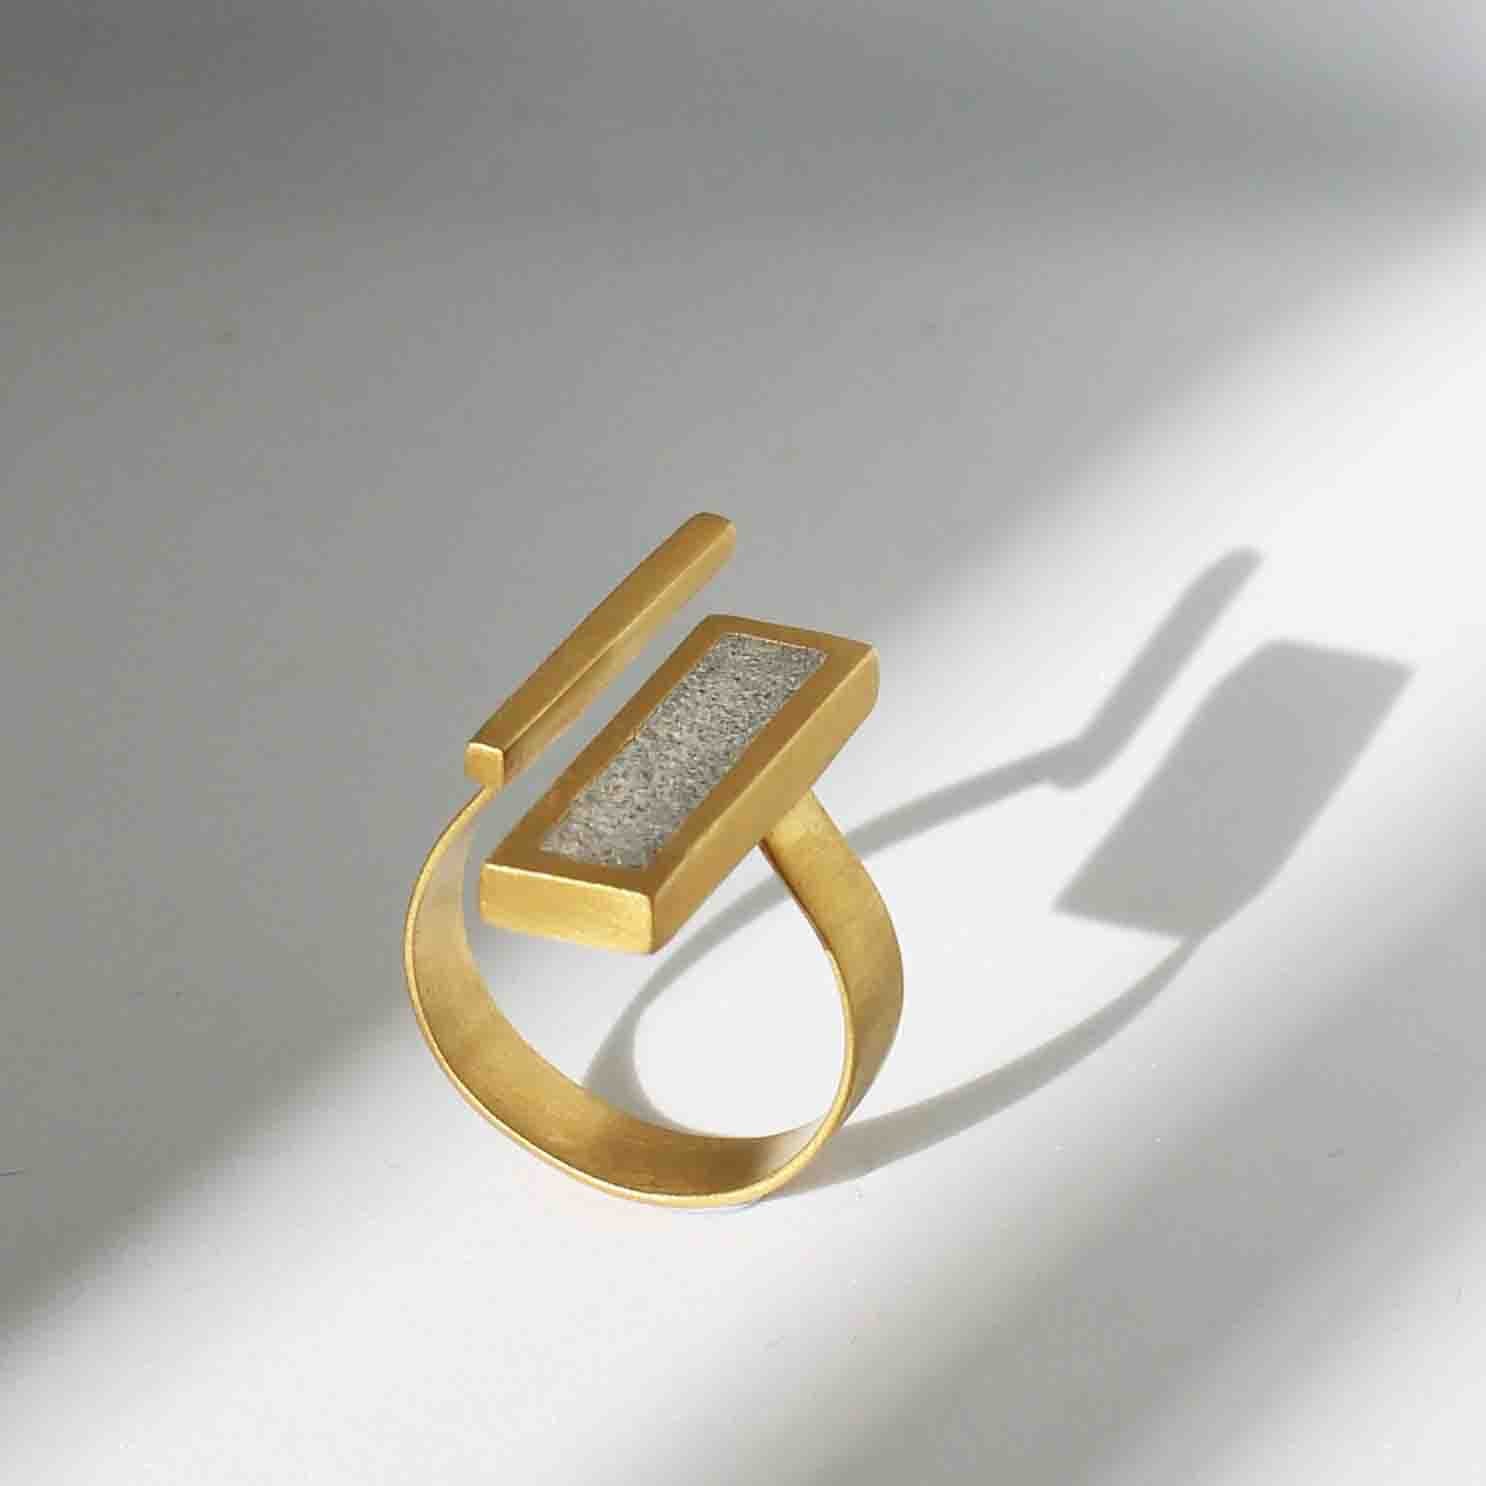 Rectangles Adjustable Concrete Ring, by BAARA. Adjustable Ring, Cement Ring, Beton Bague, Gold and Concrete, Silver and Cement, Gift for Architect